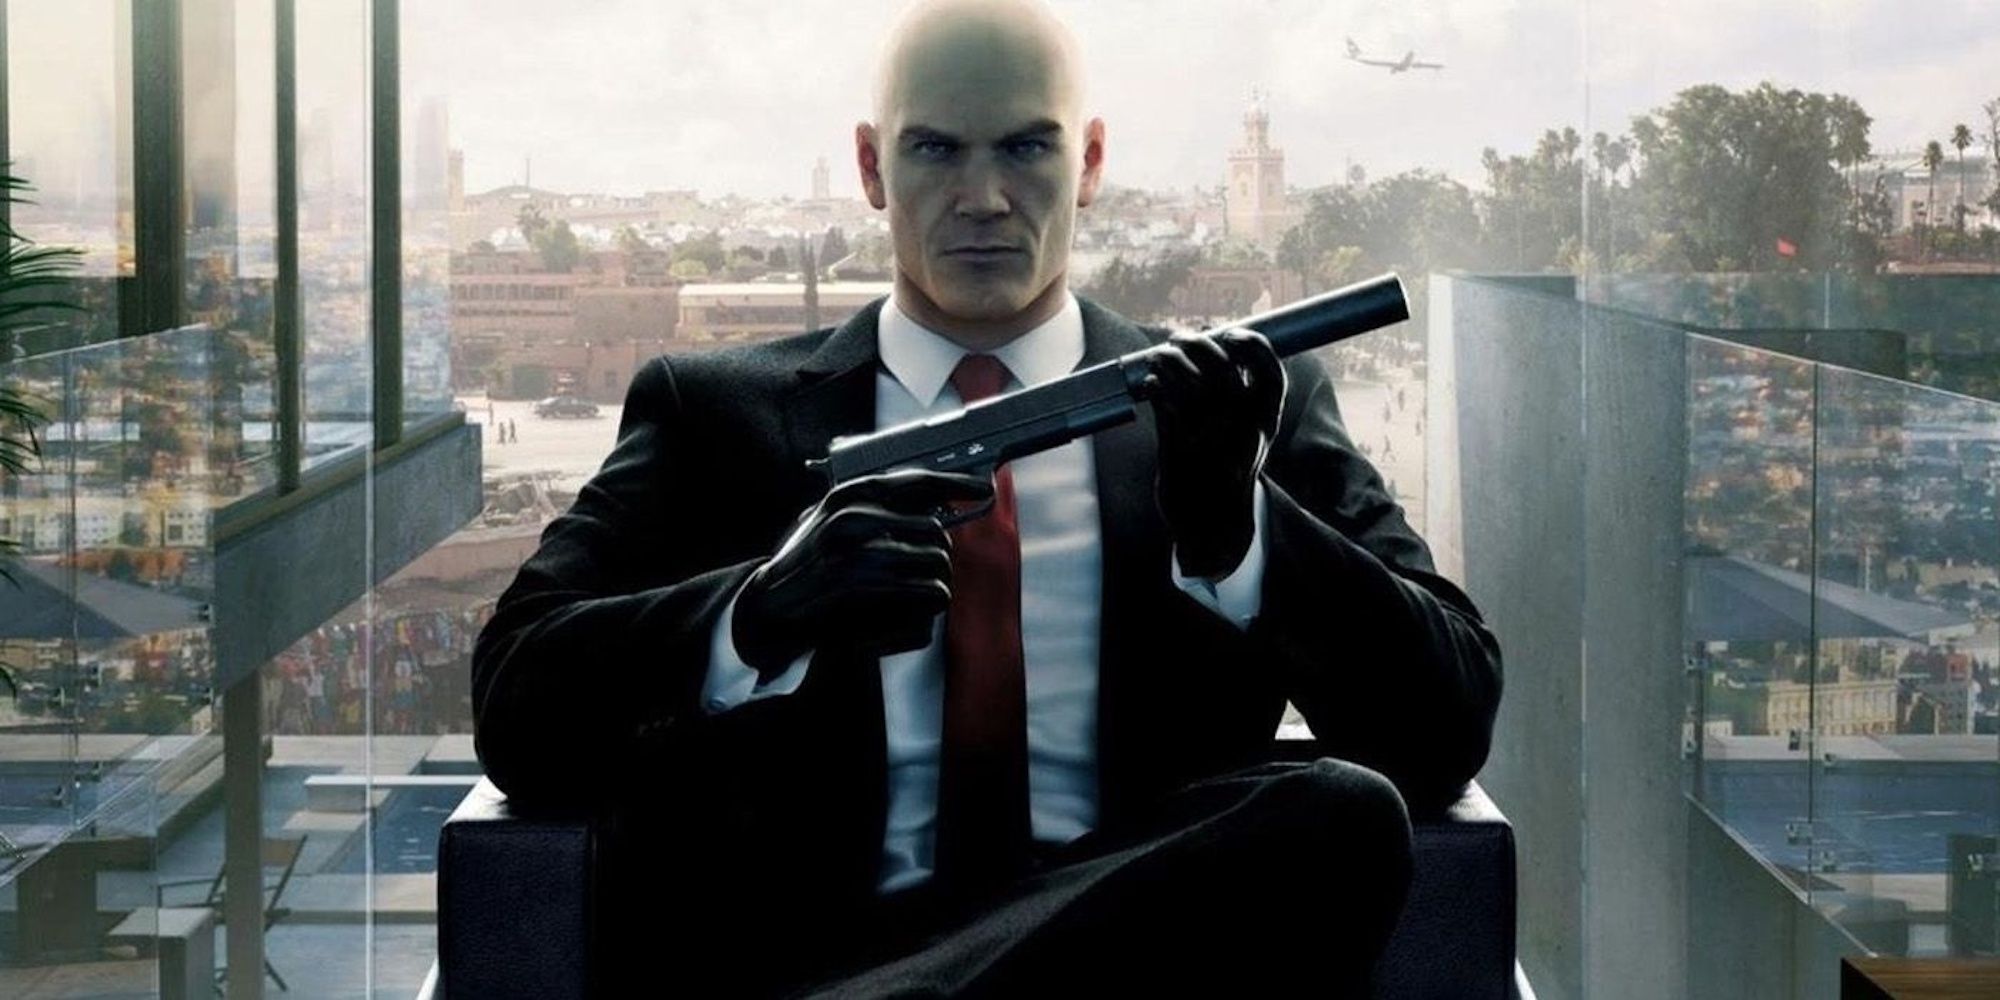 Agent 47 holding a silenced pistol against the backdrop of a cityscape